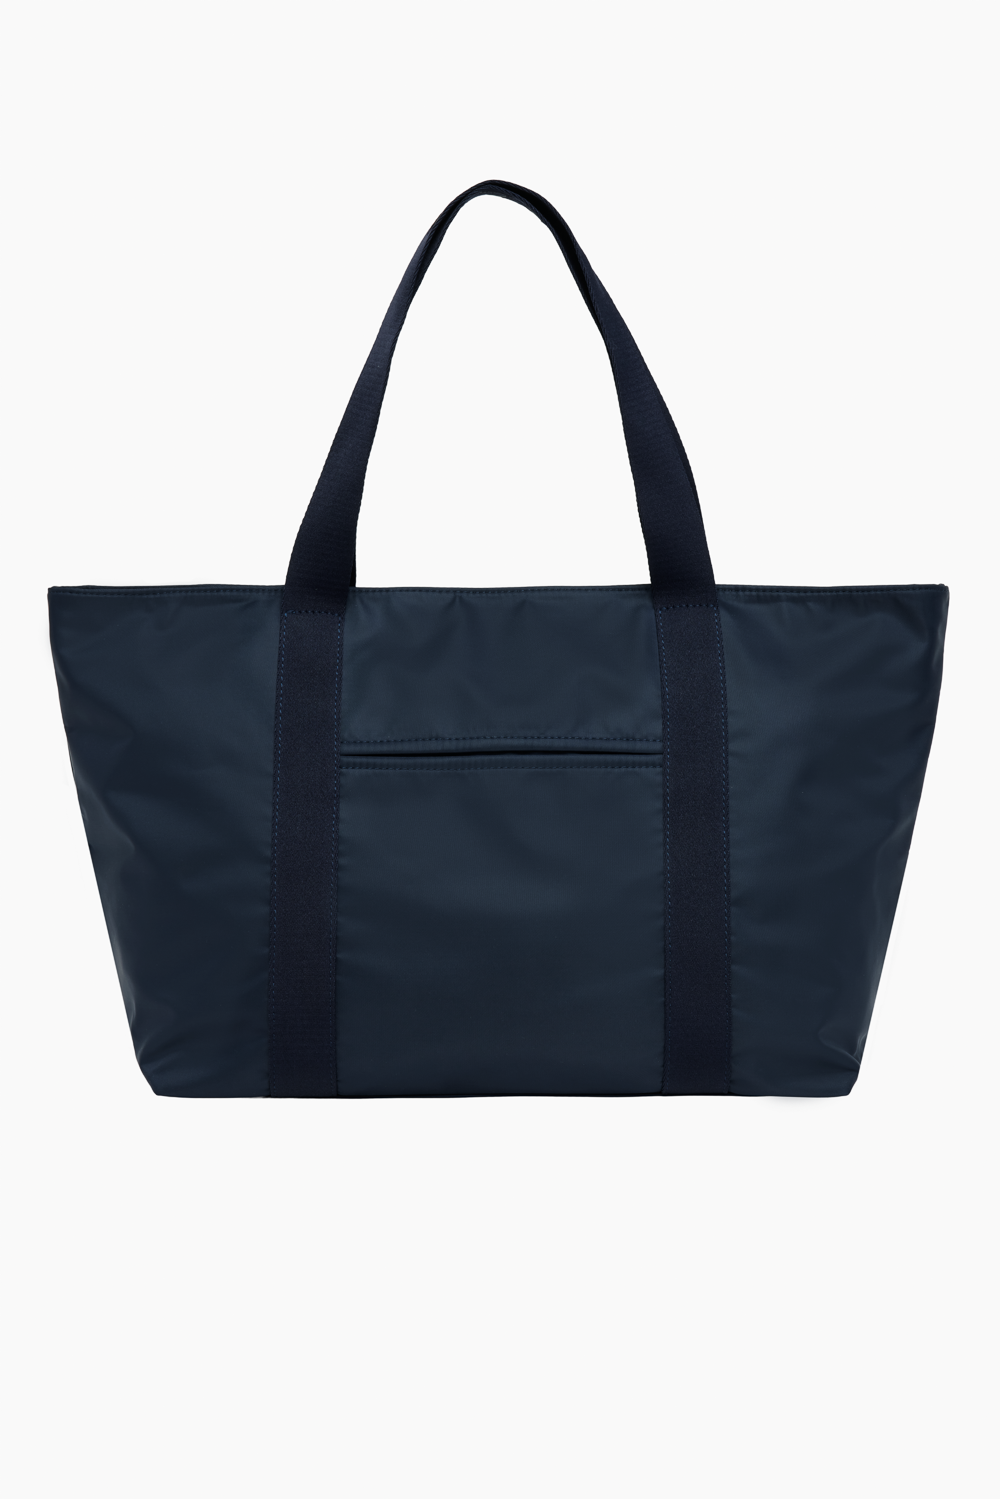 SET™ EVERYWHERE TOTE IN OXFORD